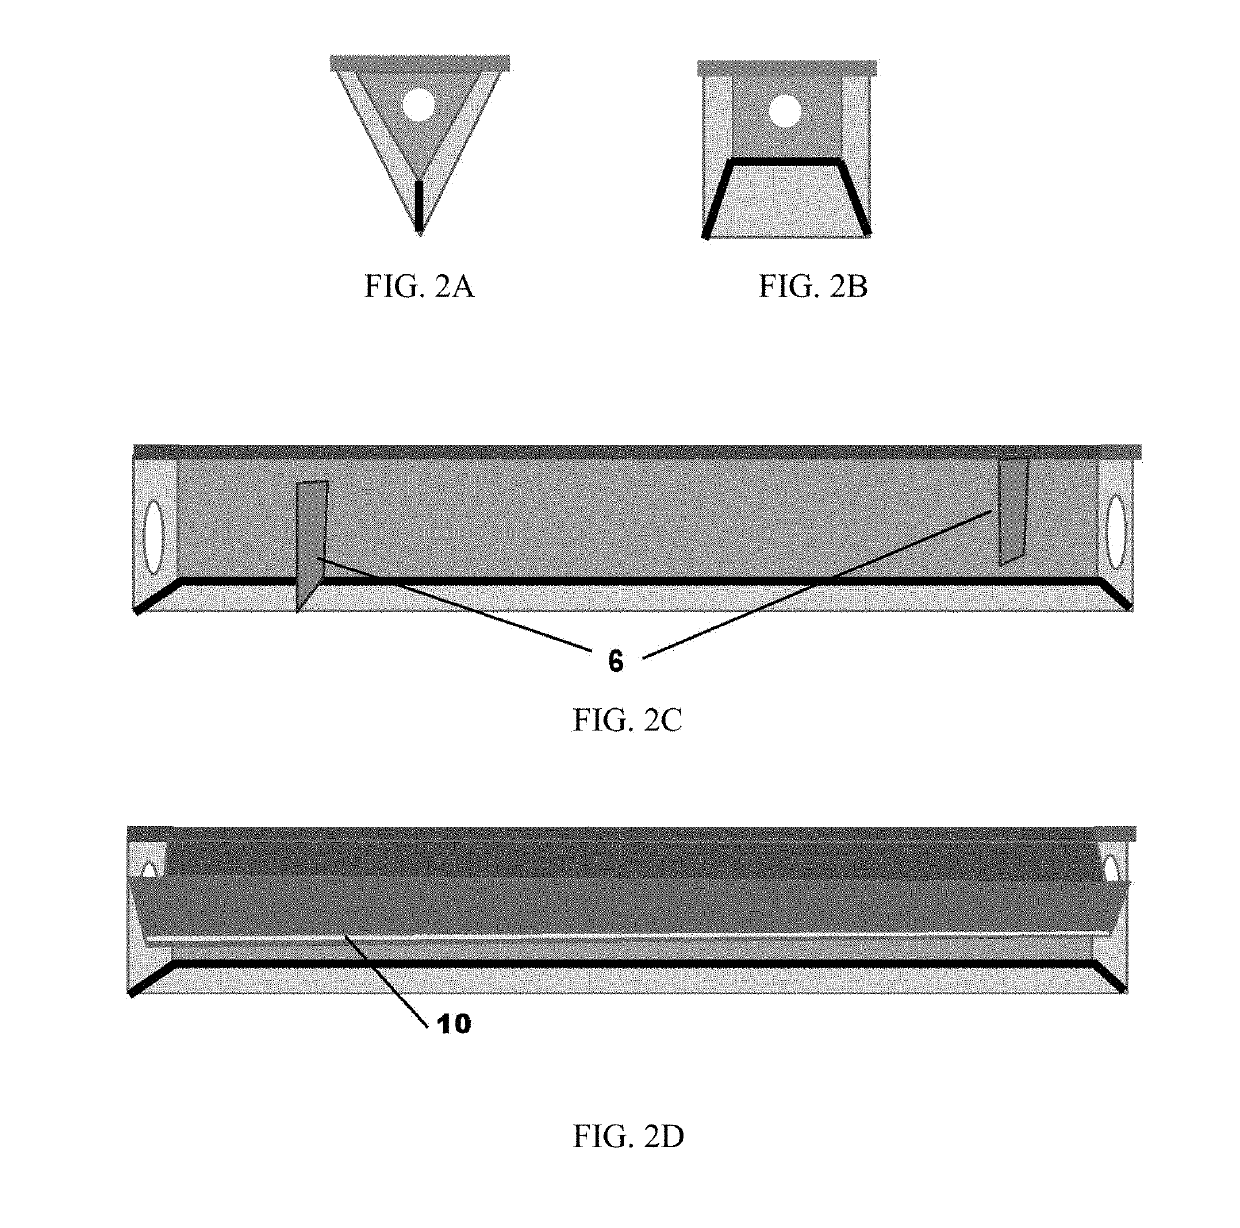 Floatable apparatus for the collection, separation, containment and removal of solids from a water body